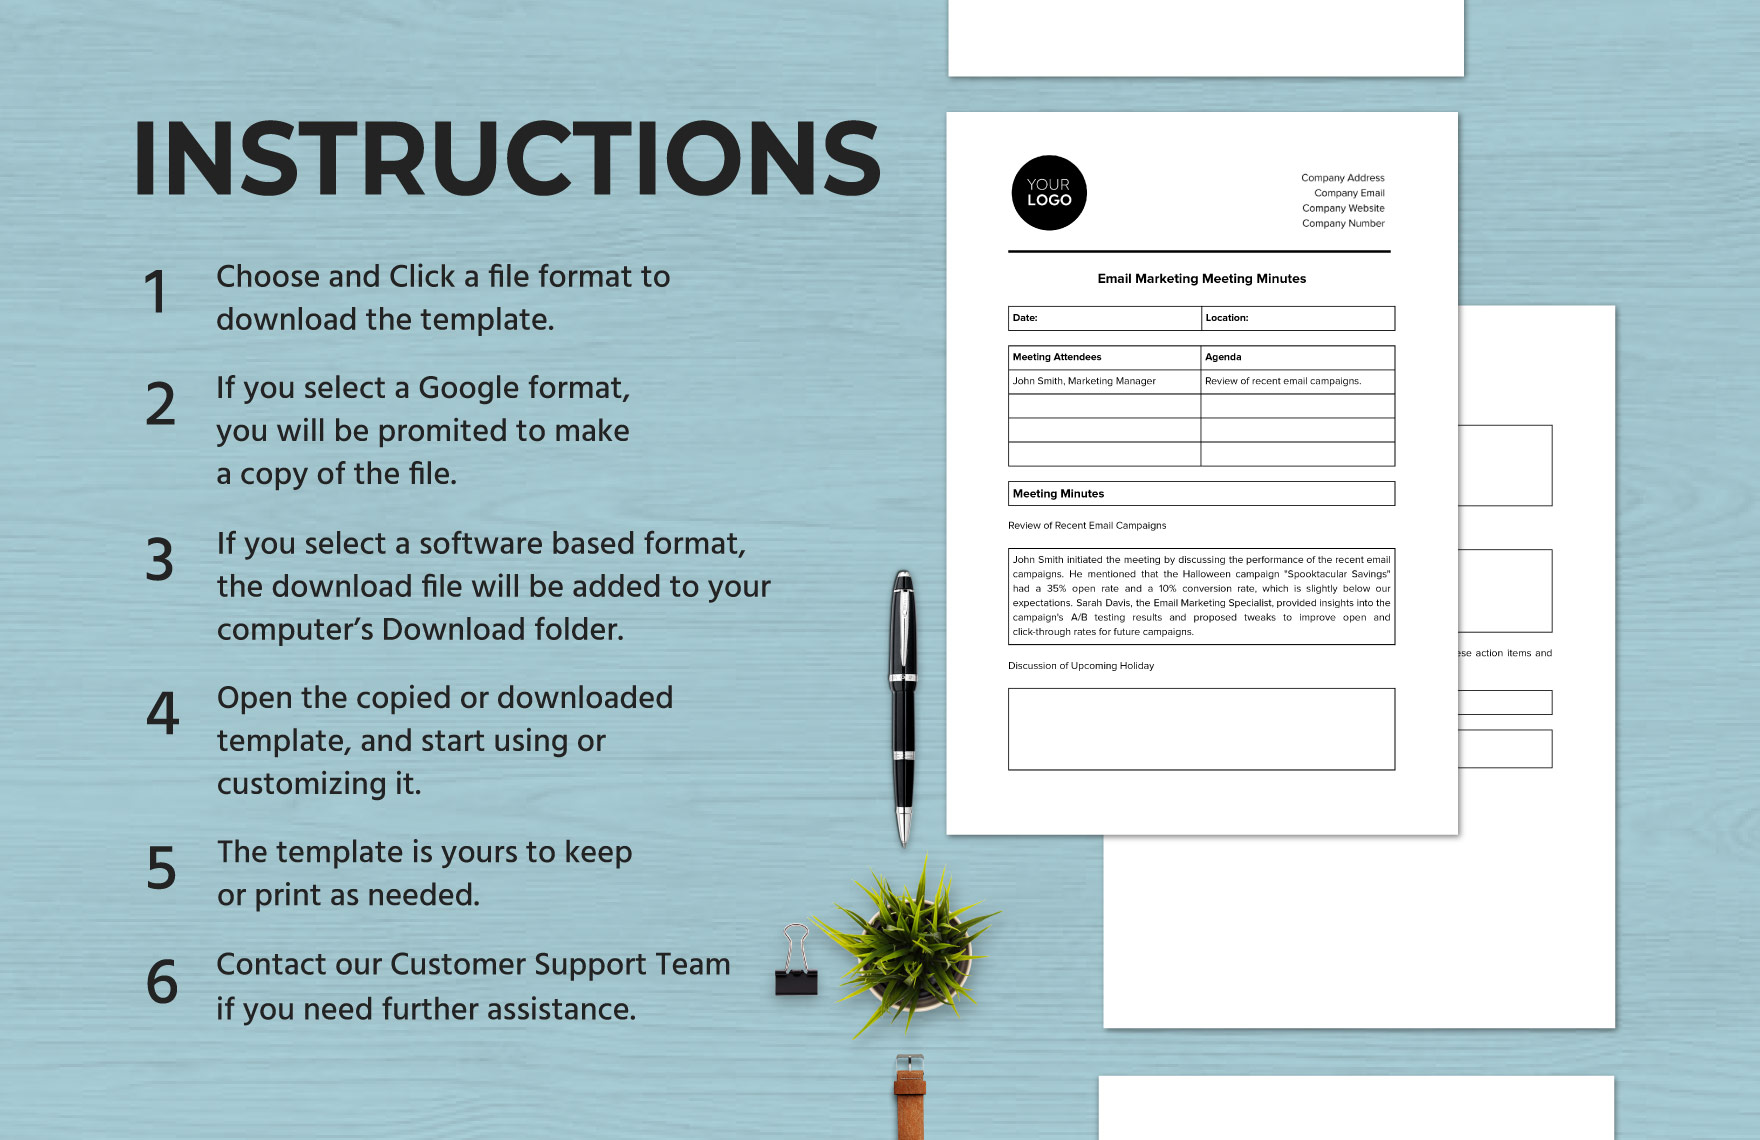 Email Marketing Meeting Minutes Template